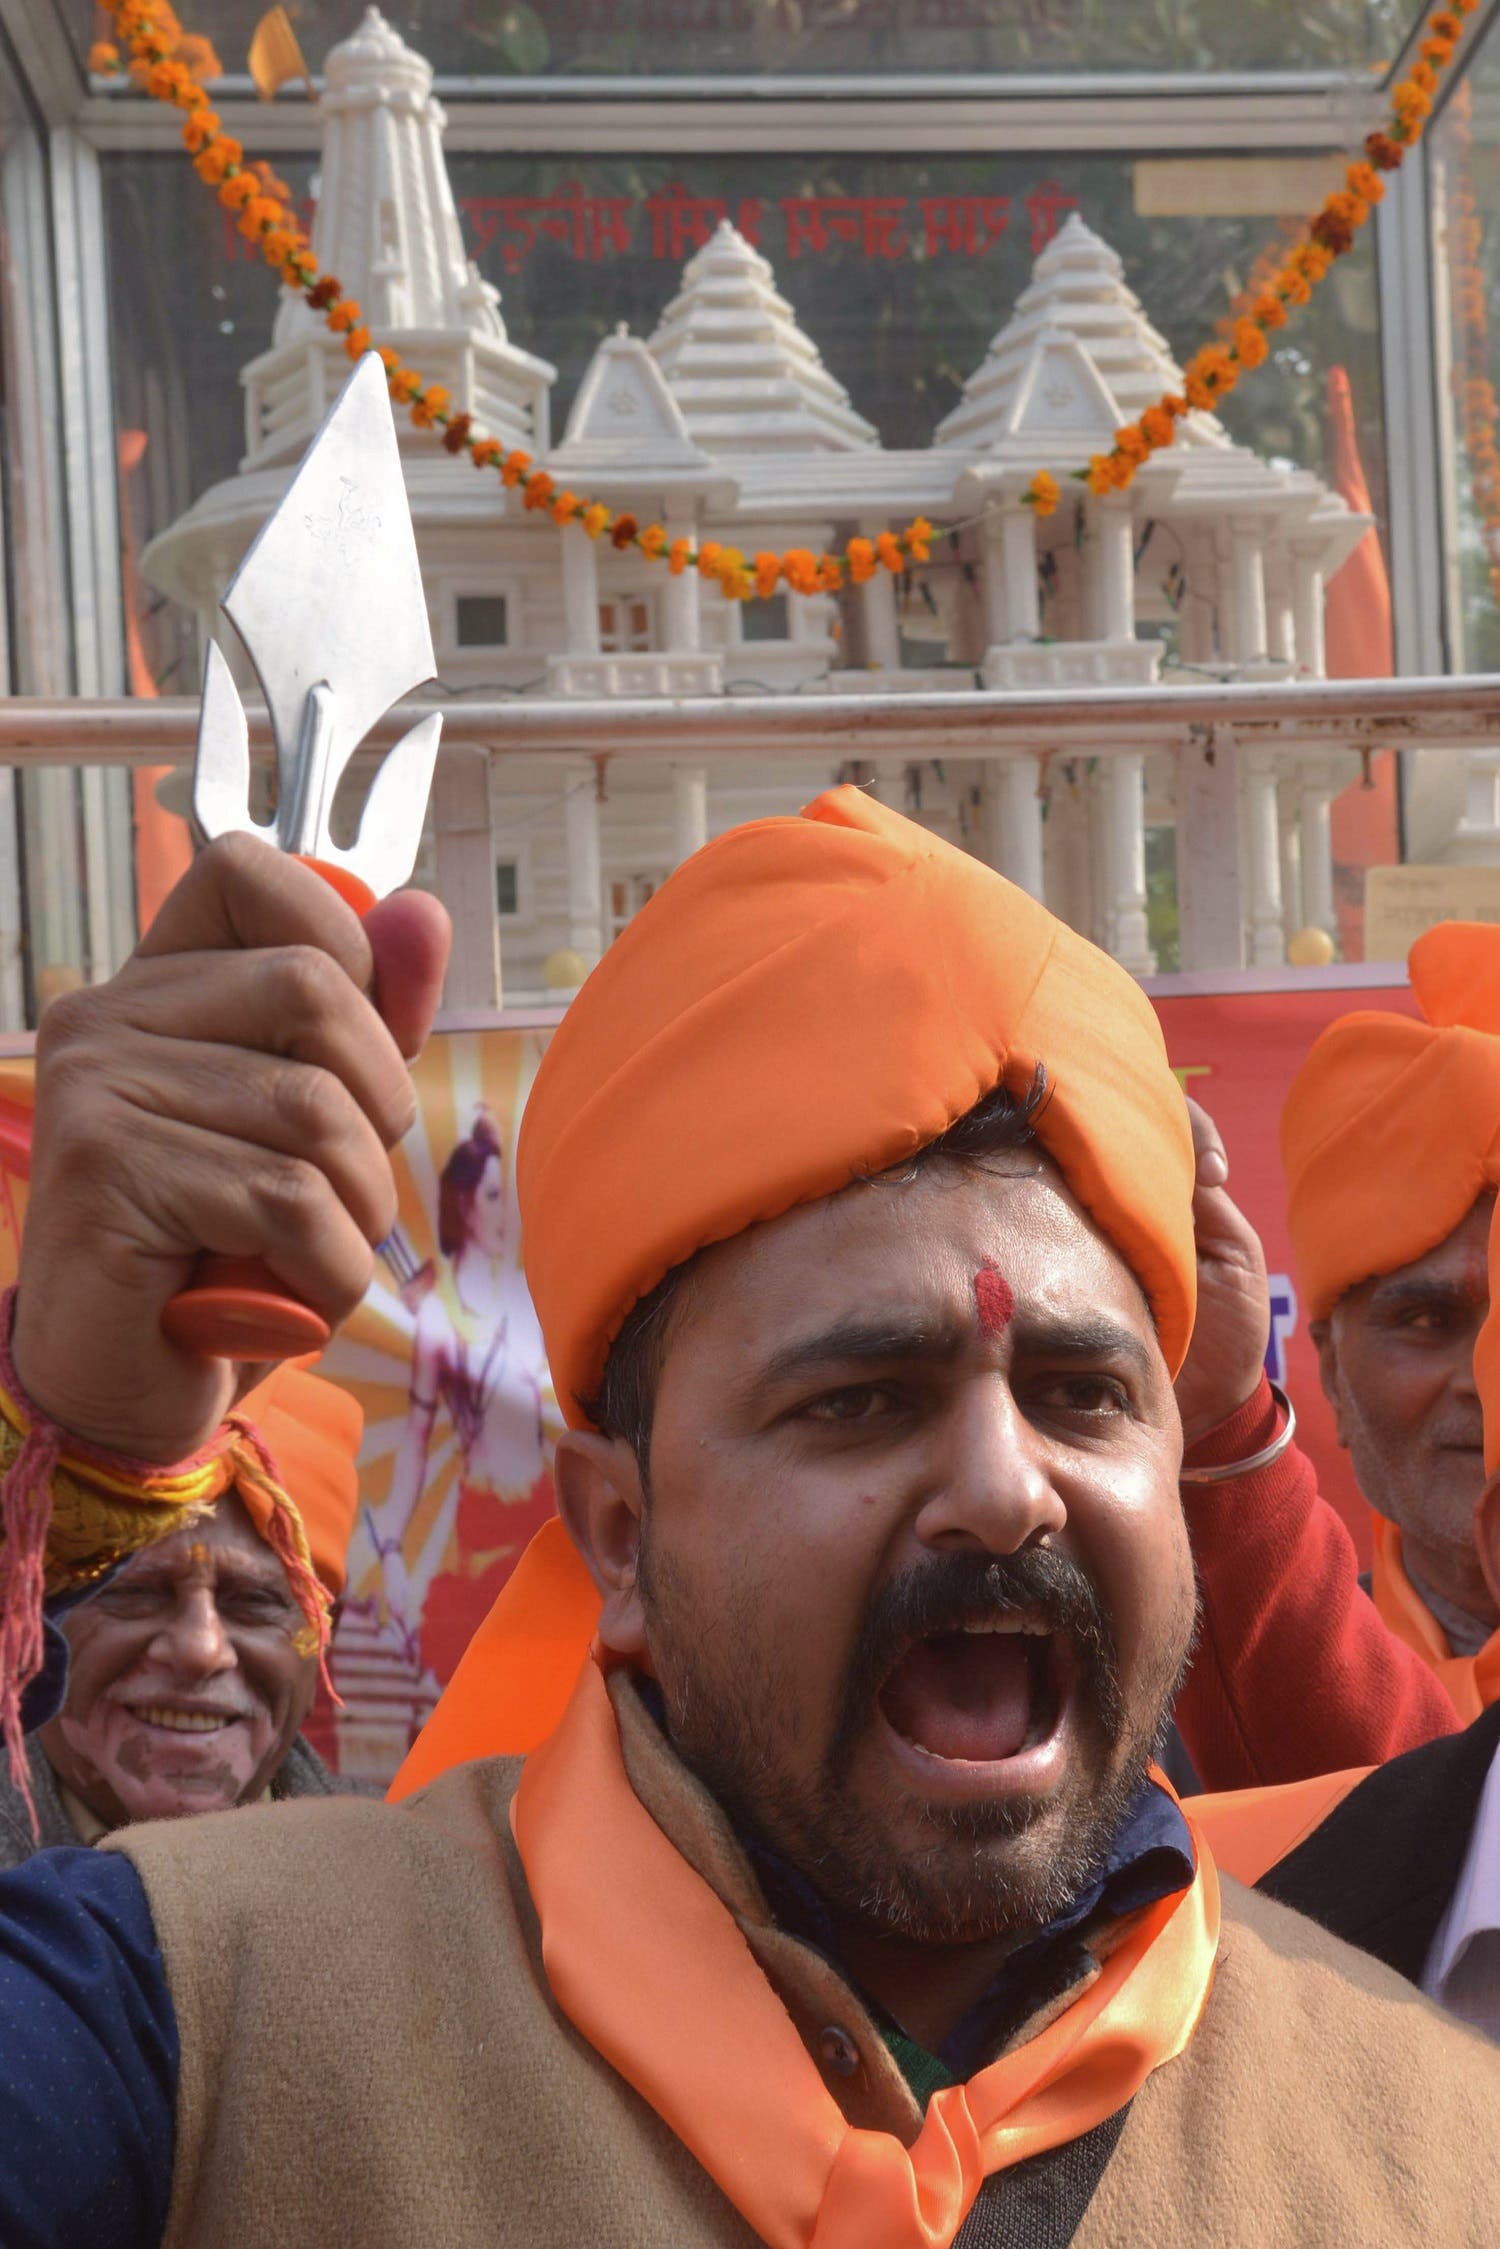 Indian activists of Hindu Bajrang Dal, along with Vishva Hindu Parishad (VHP) organizations, raise religious slogans during a procession marking the 23rd anniversary of the demolition of the Babri Masjid Mosque in Ayodhya, in Amritsar on December 6, 2015. (AFP)